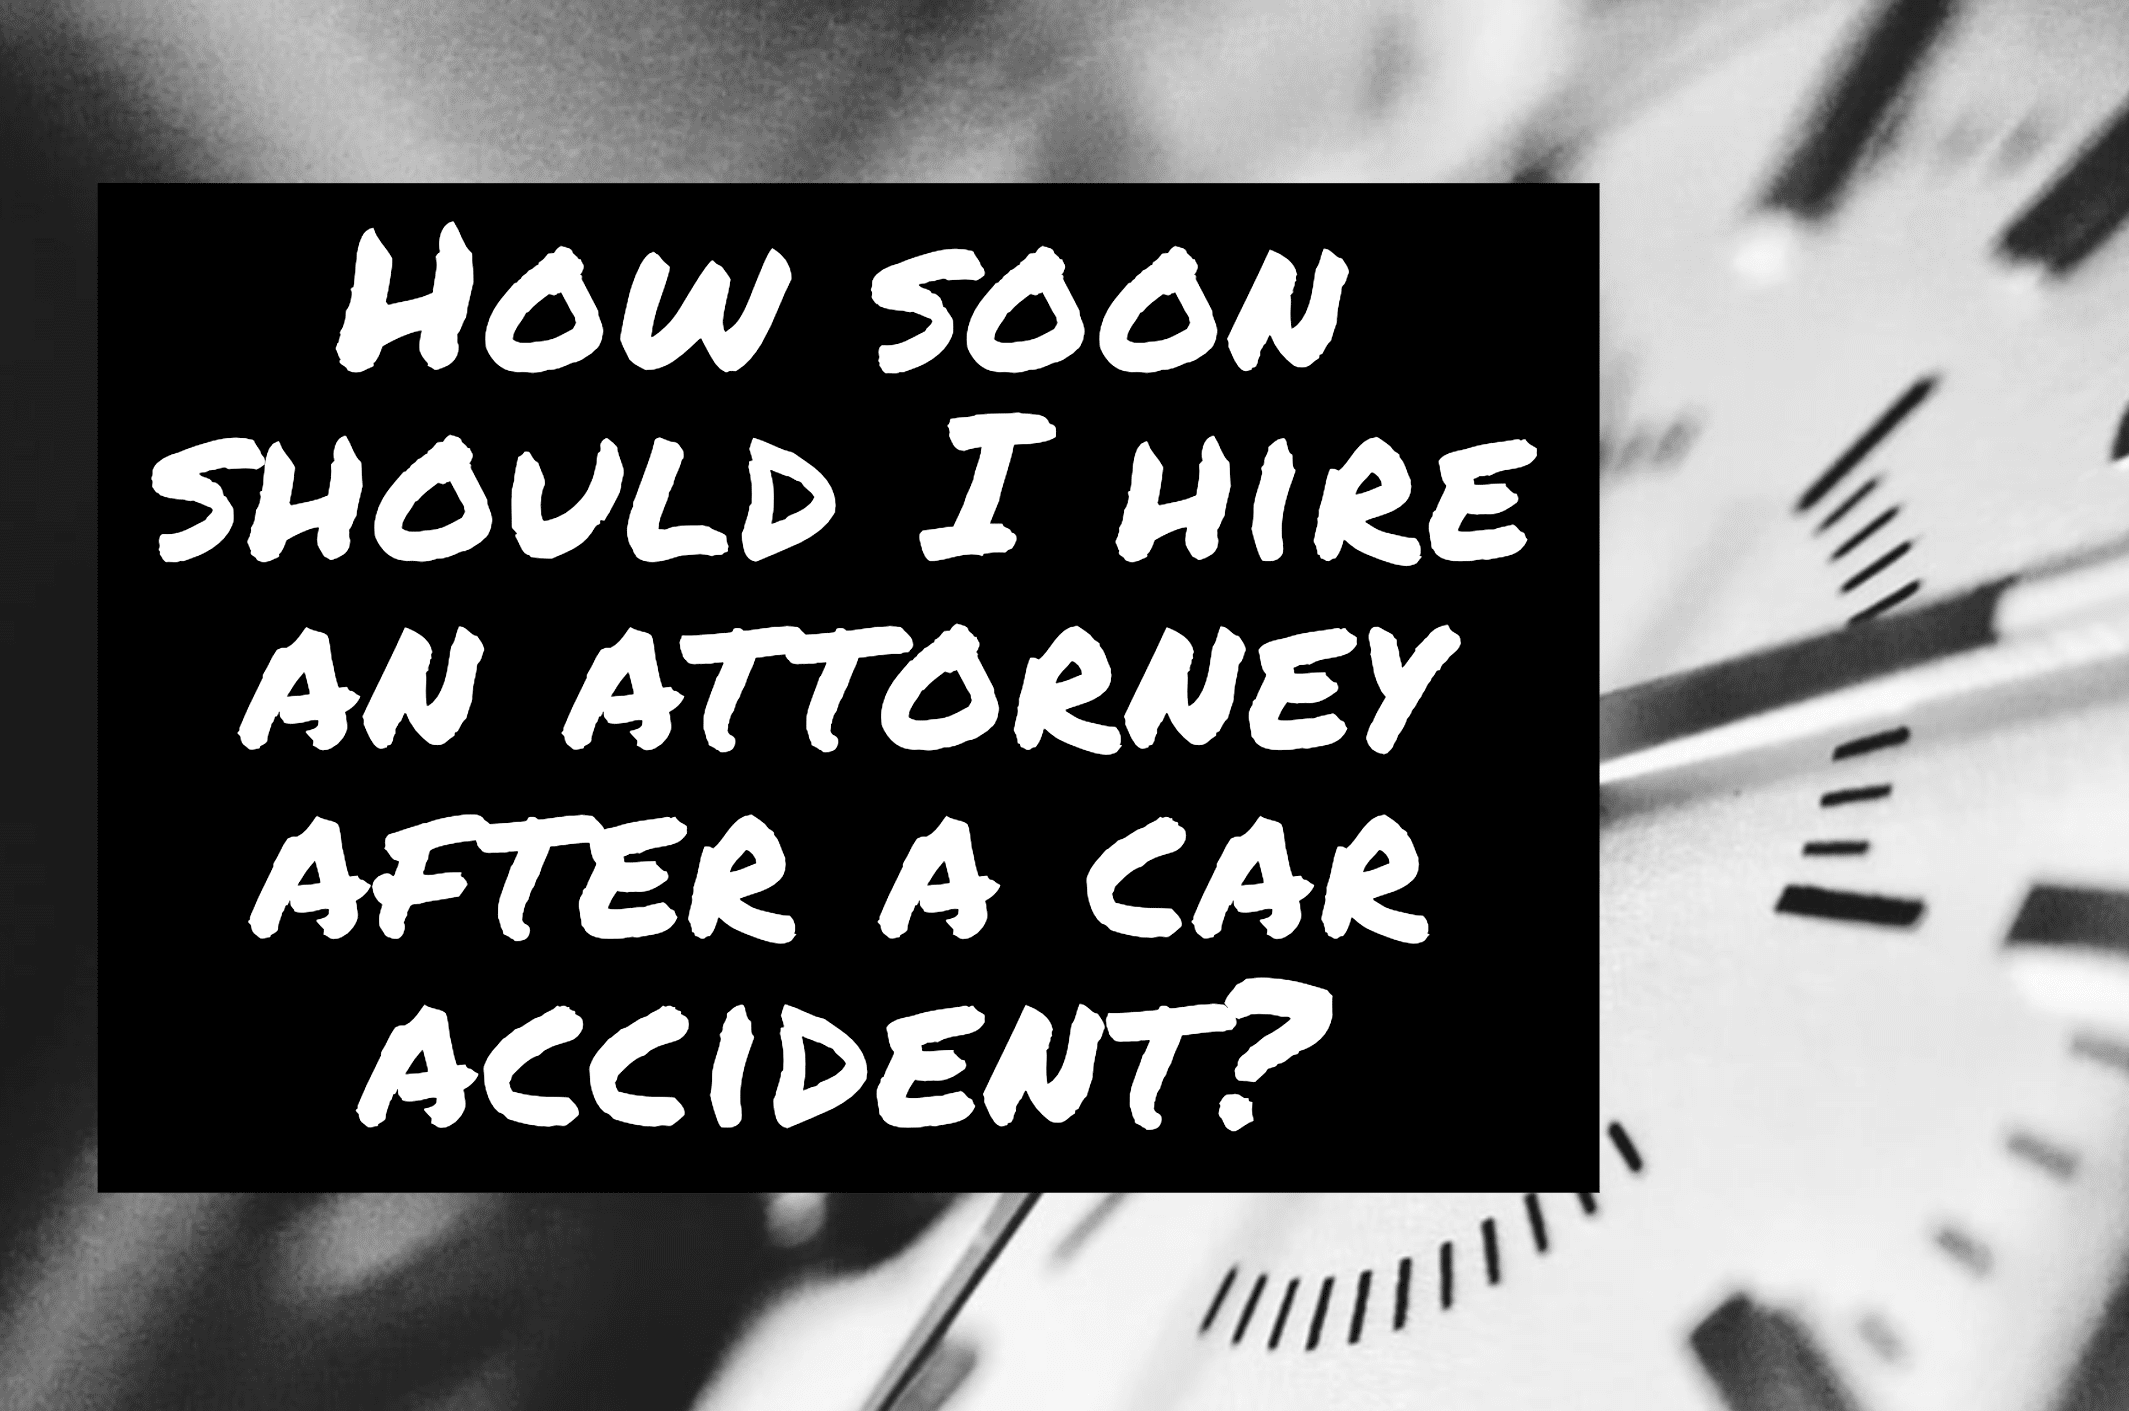 Why Should I Hire An Attorney After My Car Accident? - YouTube